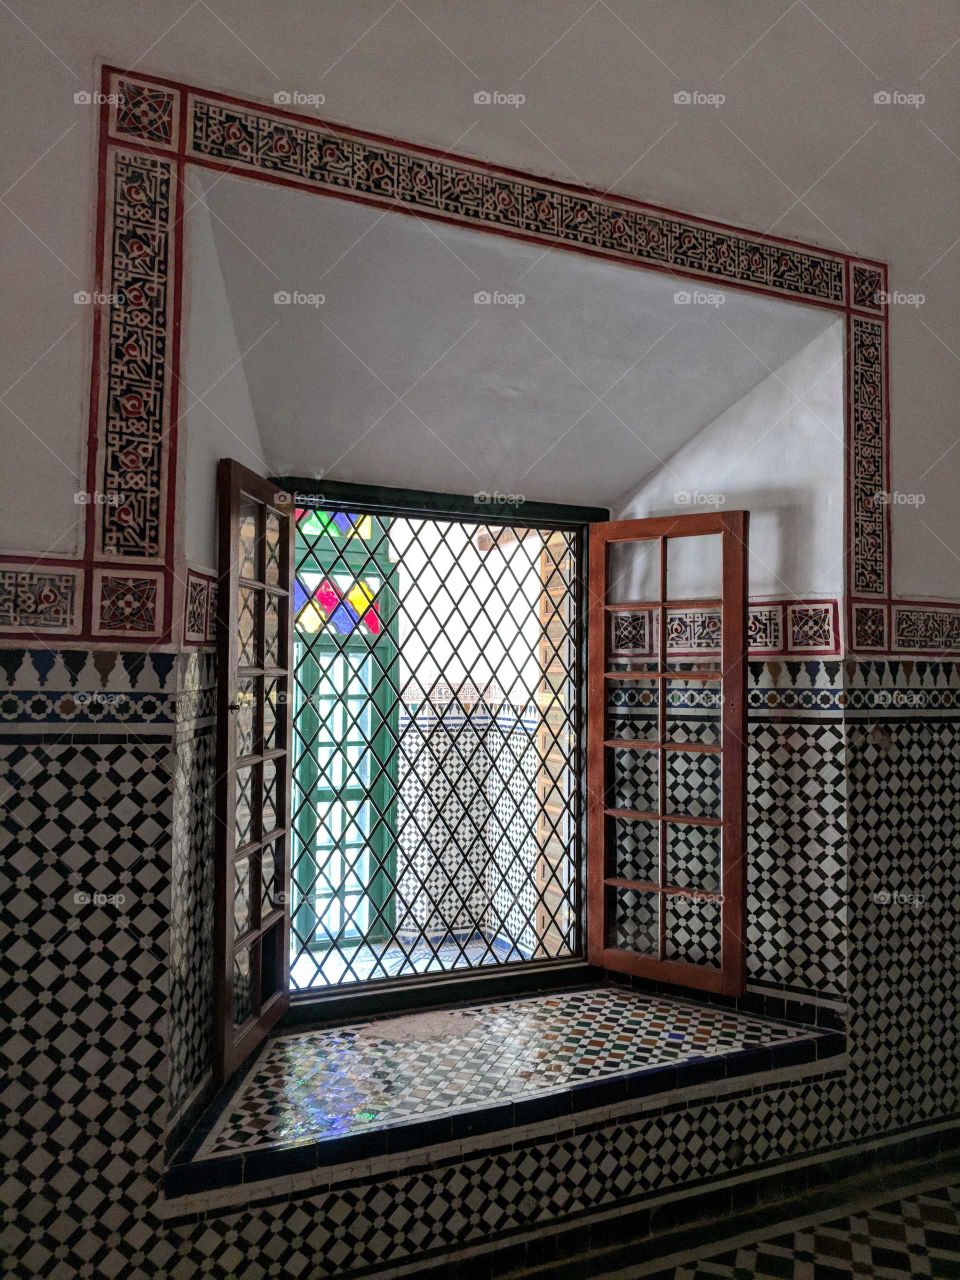 Colorful Diamond Pattern Stained Glass Window and Grate Surrounded by a Ceramic Tile Mosaic Wall in the Bahia Palace in Marrakech in Morocco